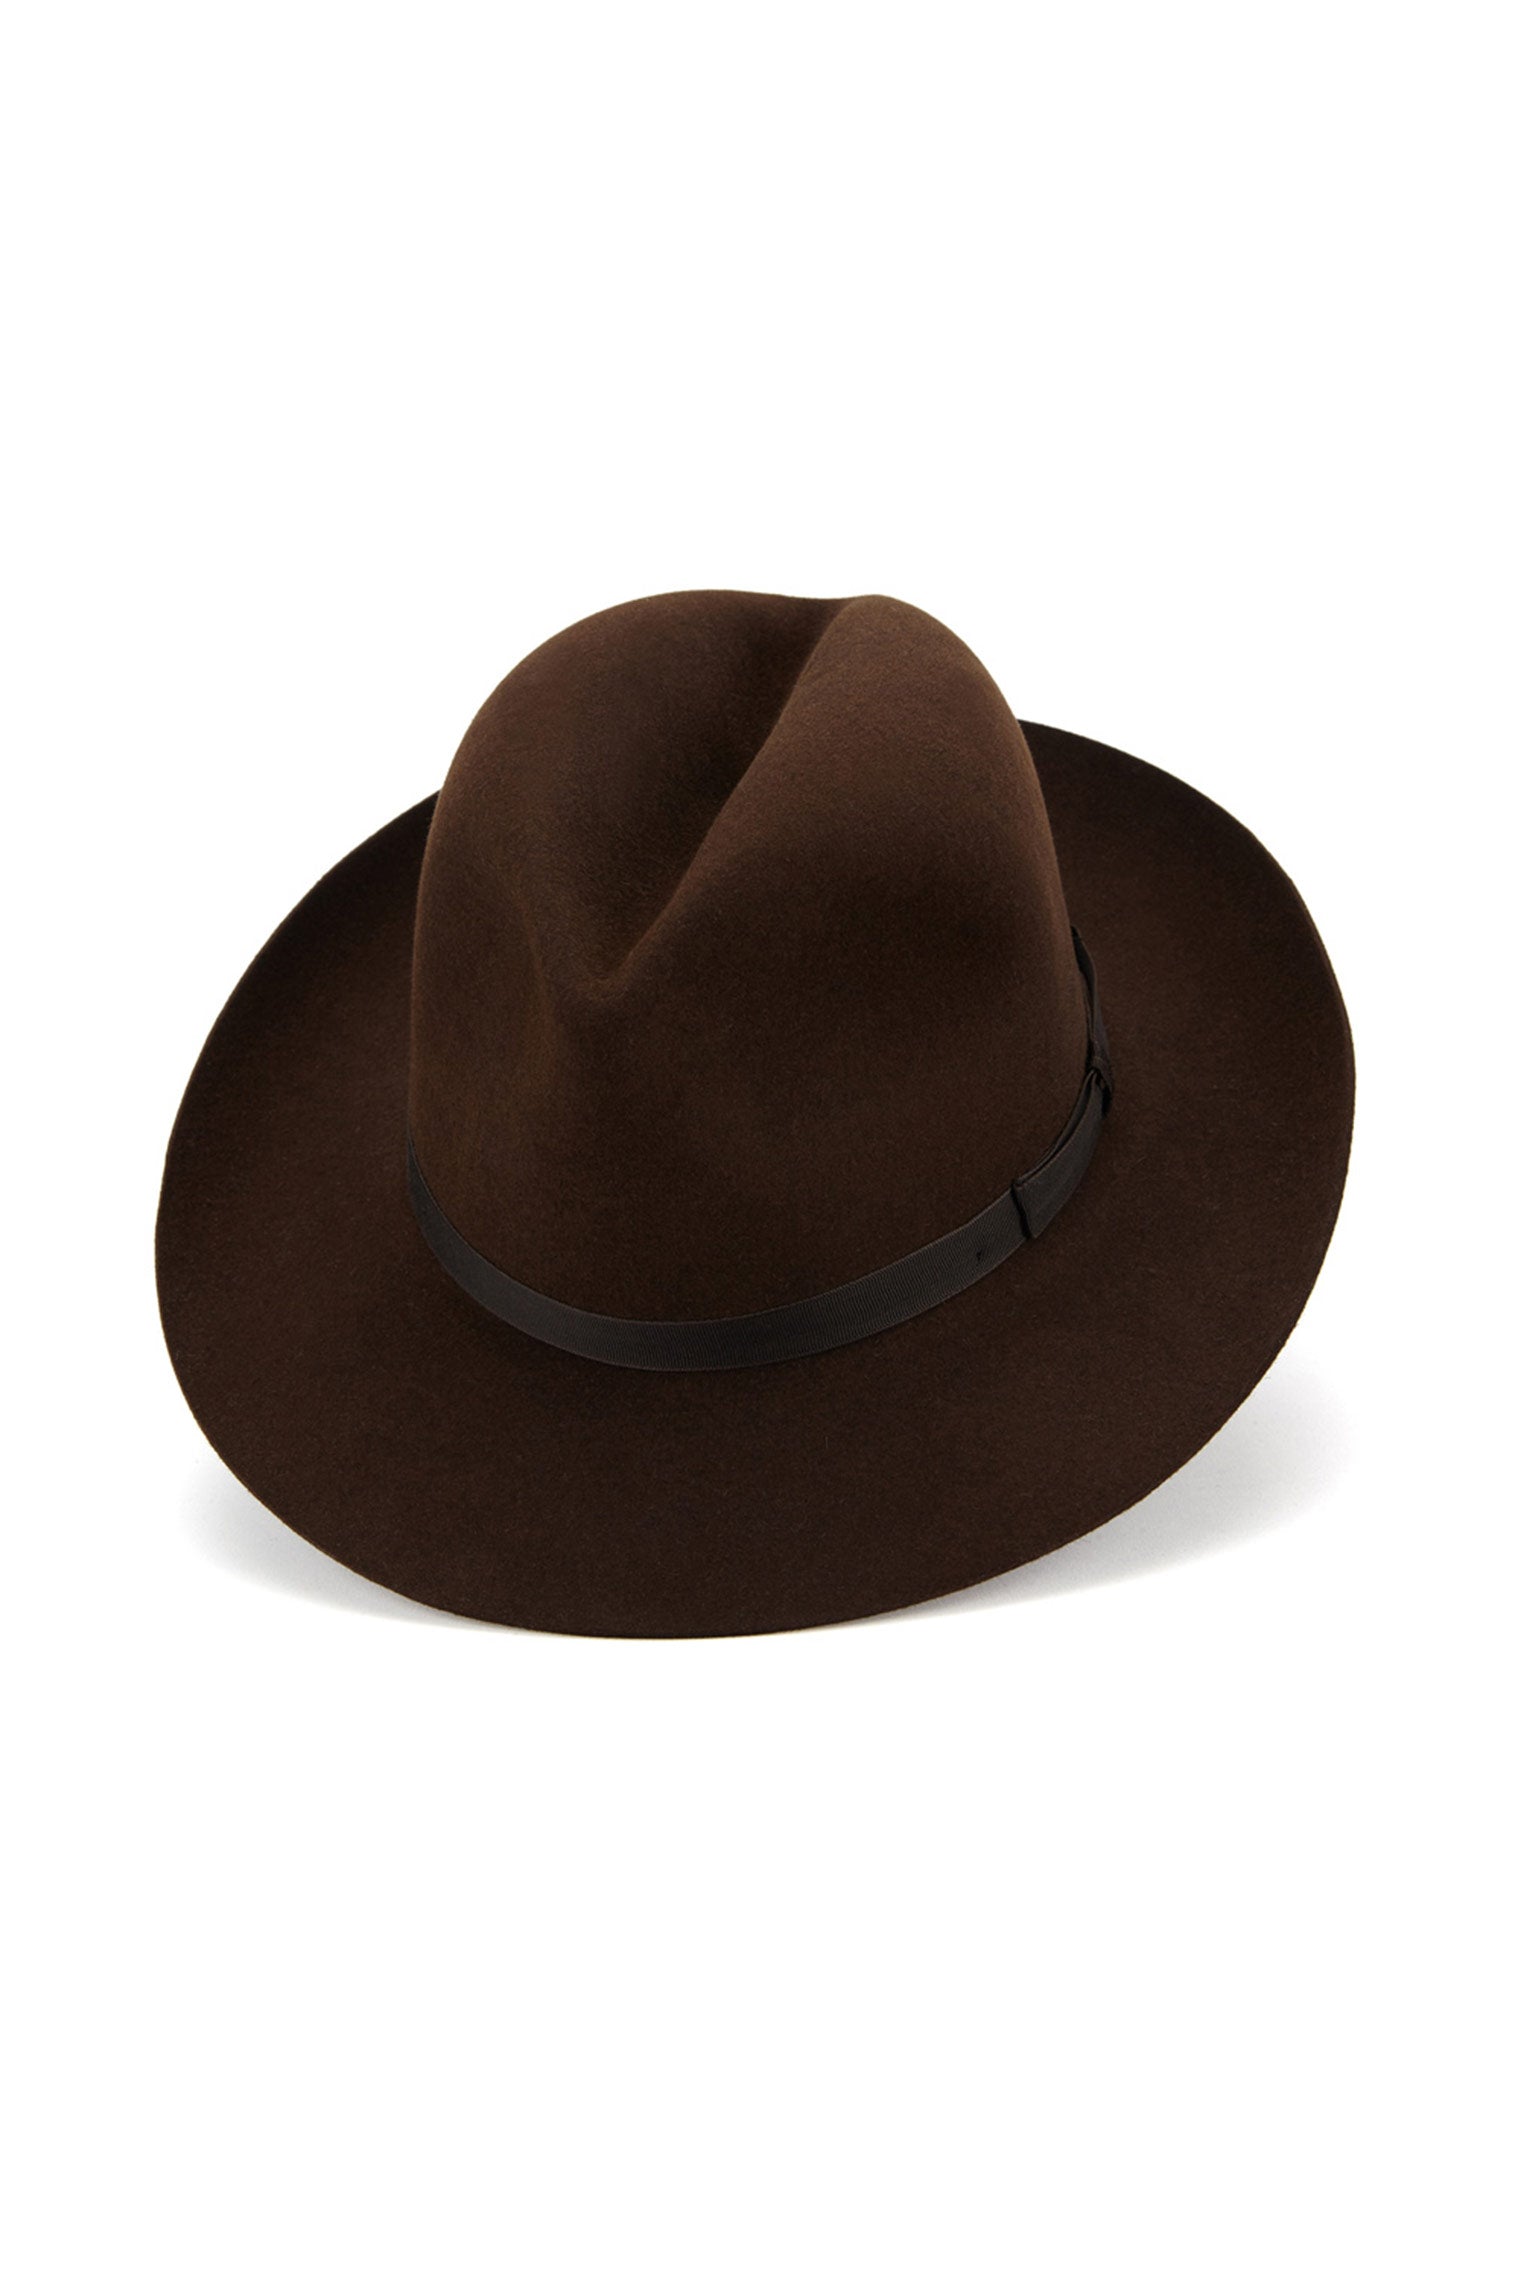 York Fedora - Father's Day Gift Guide - Lock & Co. Hatters London UK